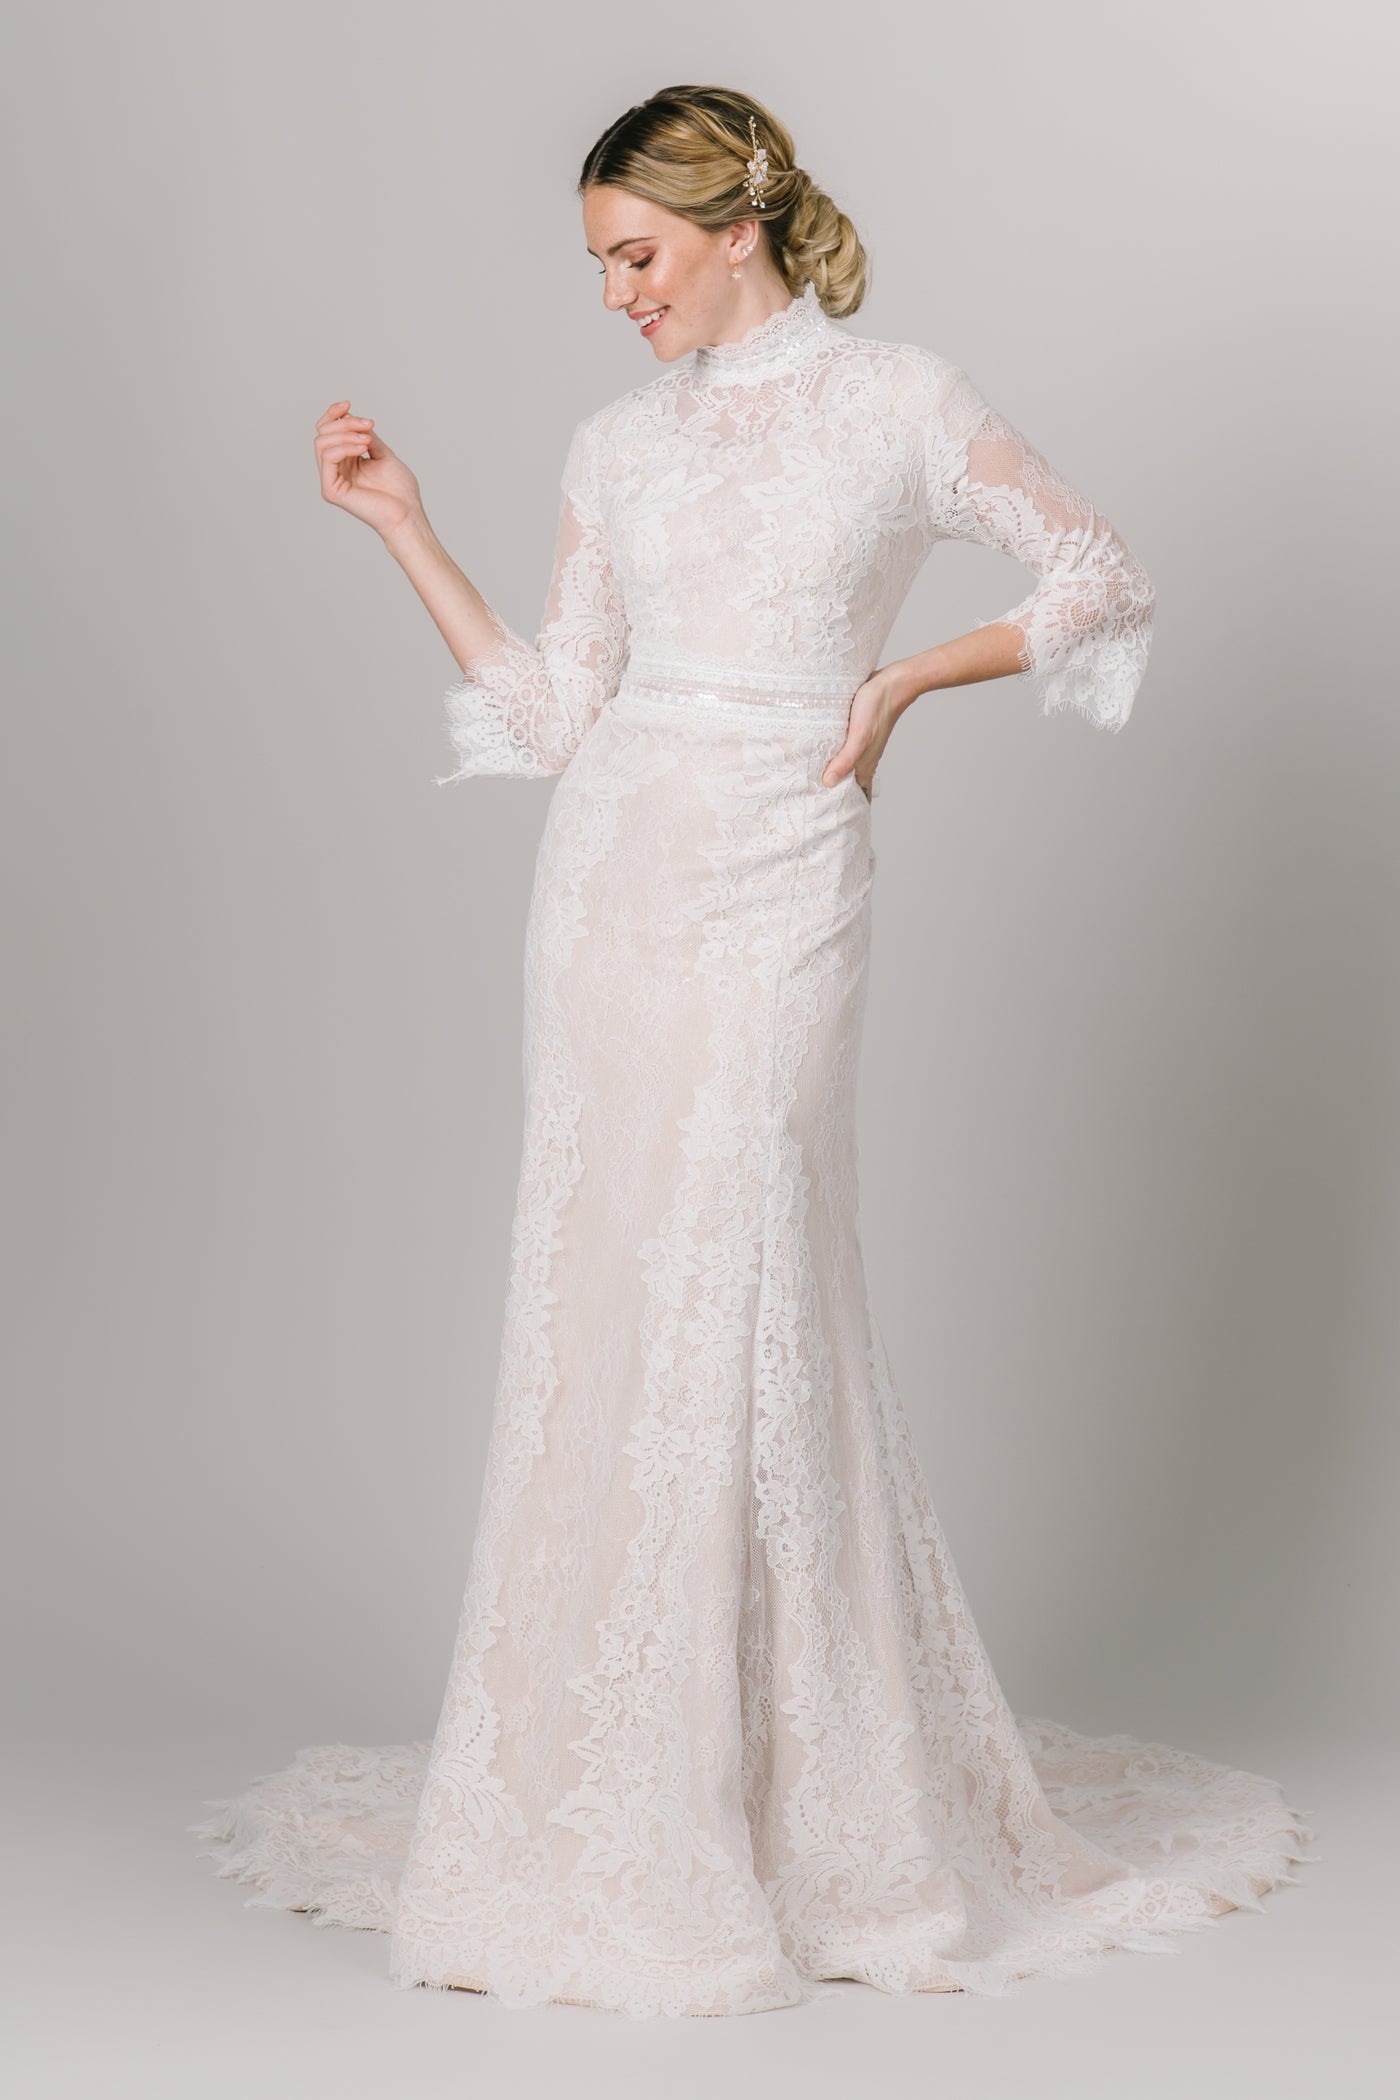 This Modest Wedding Dress features a high neckline, bell sleeves, and a fit and flare style. - Modest Clothing - Modest Dresses - Modest Wedding Dresses - LatterDayBride